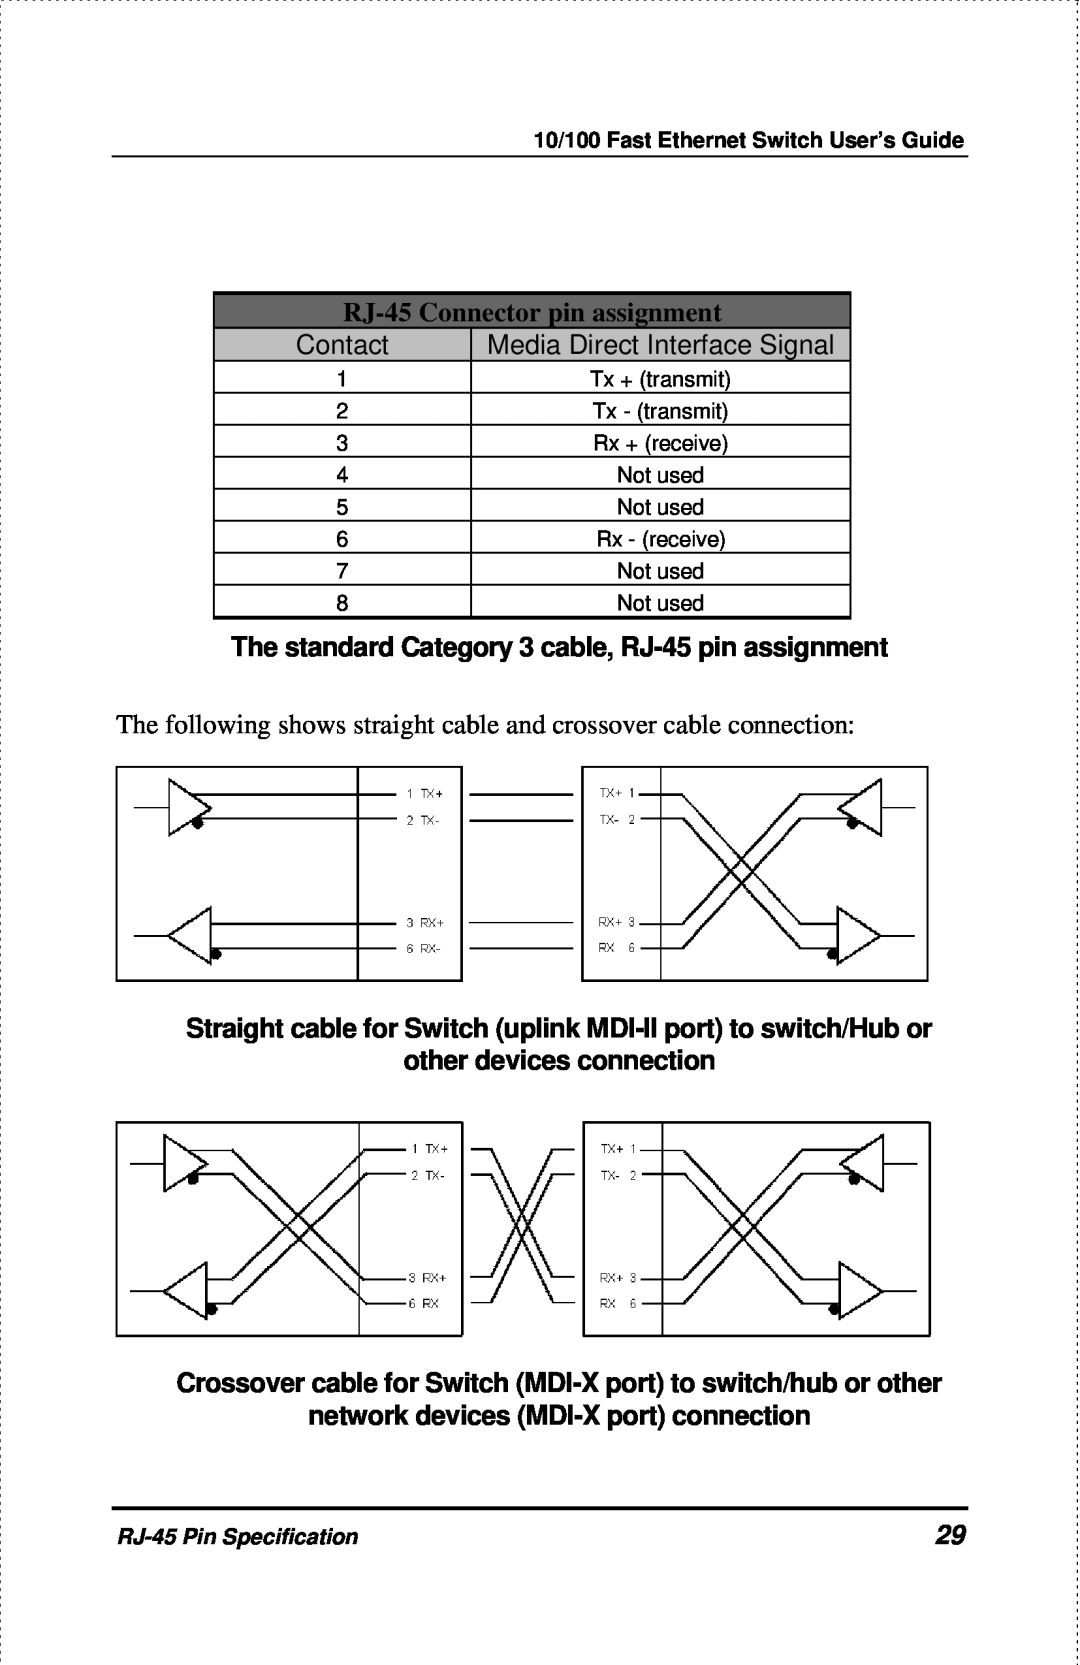 D-Link DES-1004 manual RJ-45 Connector pin assignment, The standard Category 3 cable, RJ-45 pin assignment 